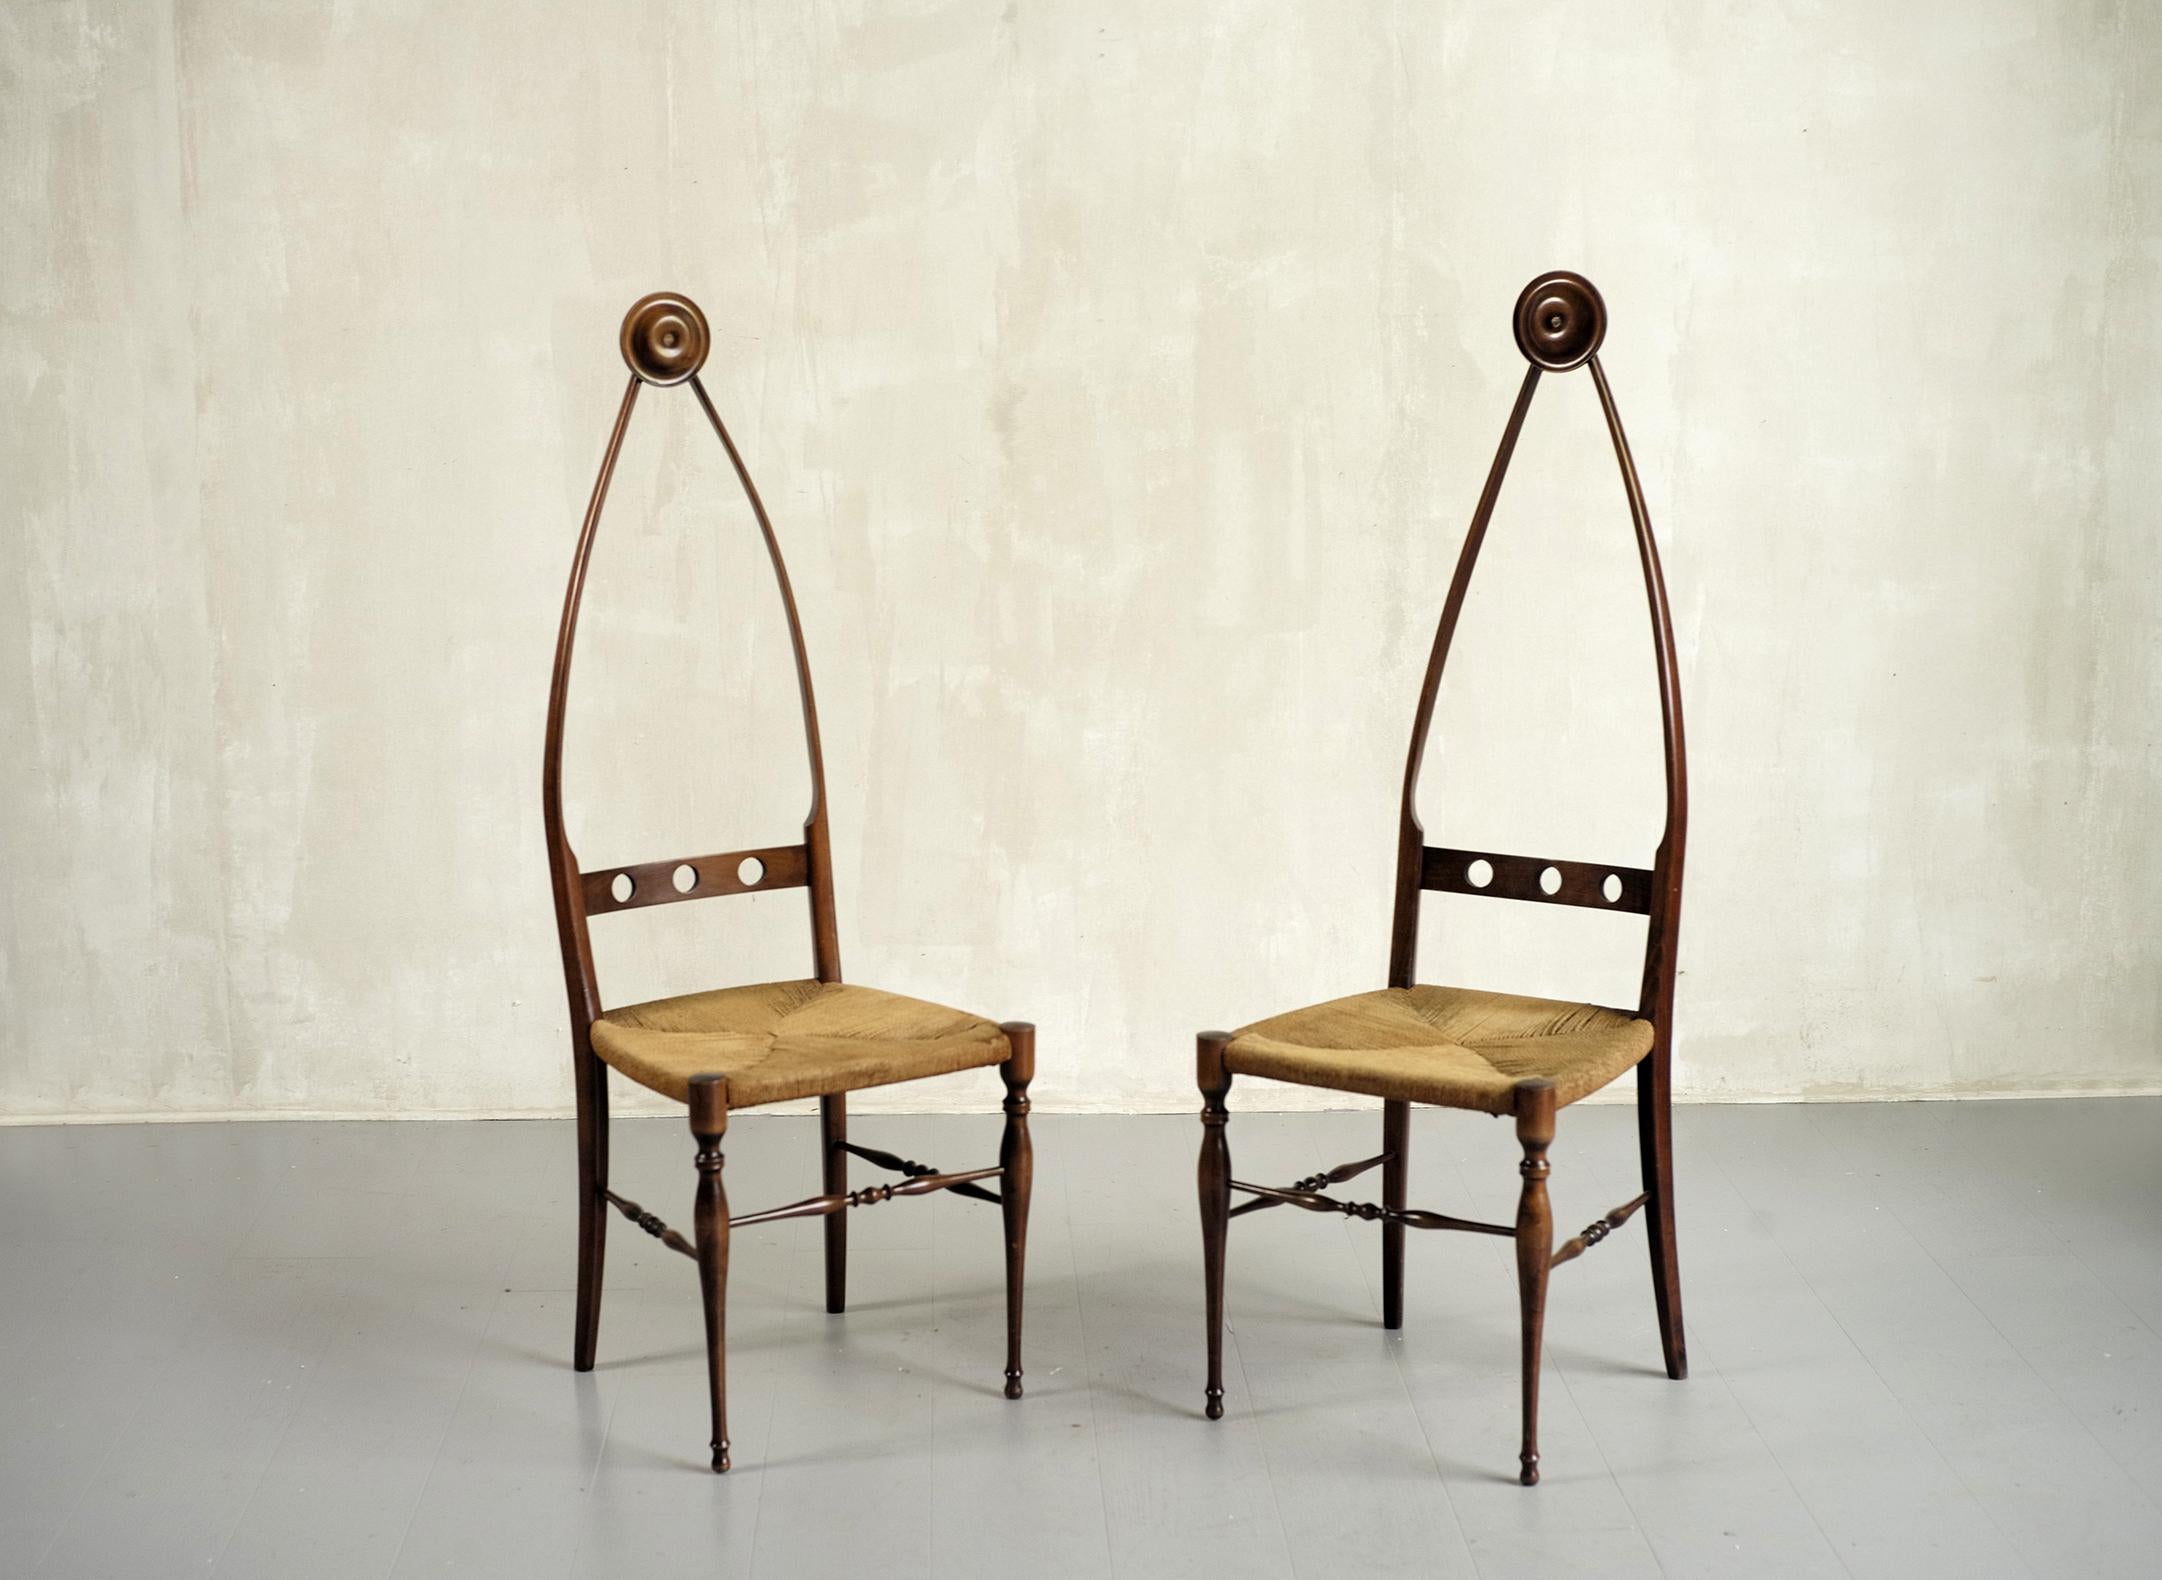 Pair of ceremonial chairs by Pozzi and Verga, Italy 1950. Seat in rope, structure in varnished wood. With a design of great elegance, these sculptural chairs combine comfort and lightness.
 